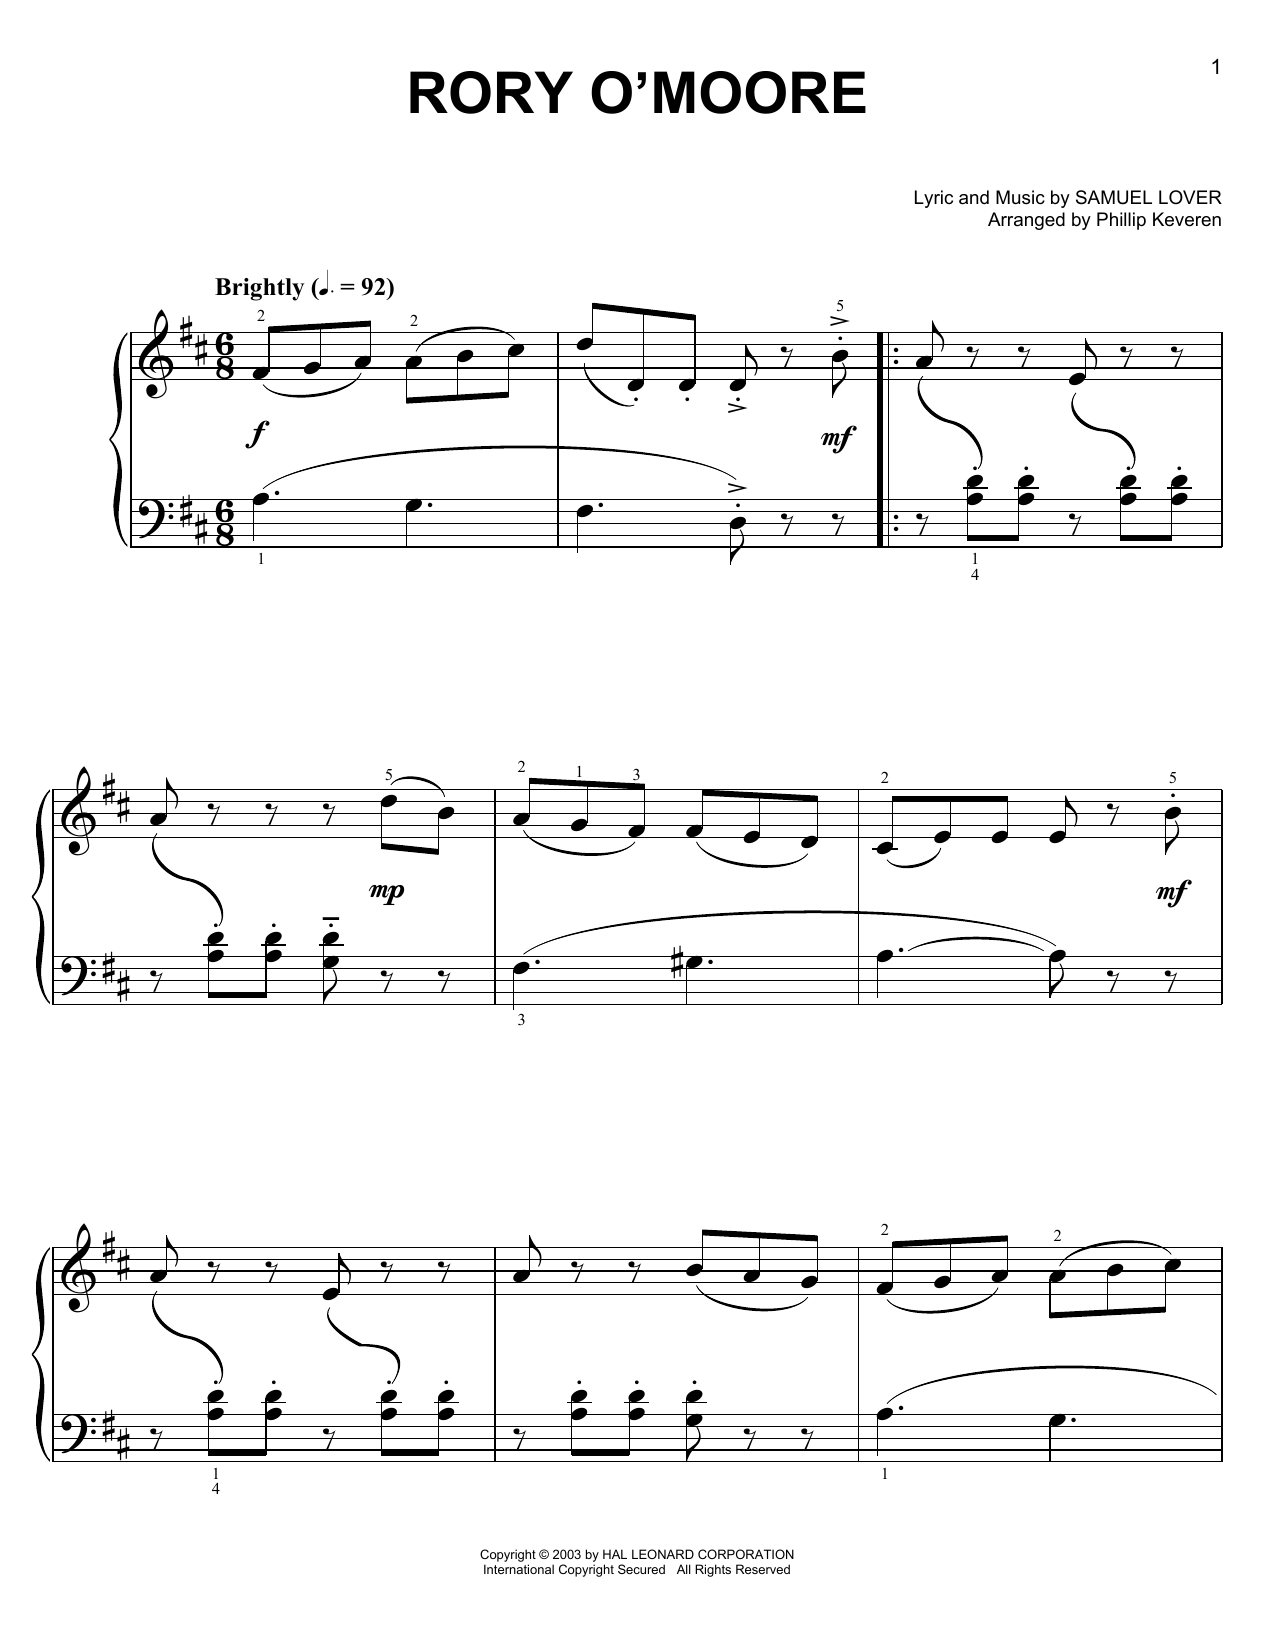 Download Phillip Keveren Rory O'Moore Sheet Music